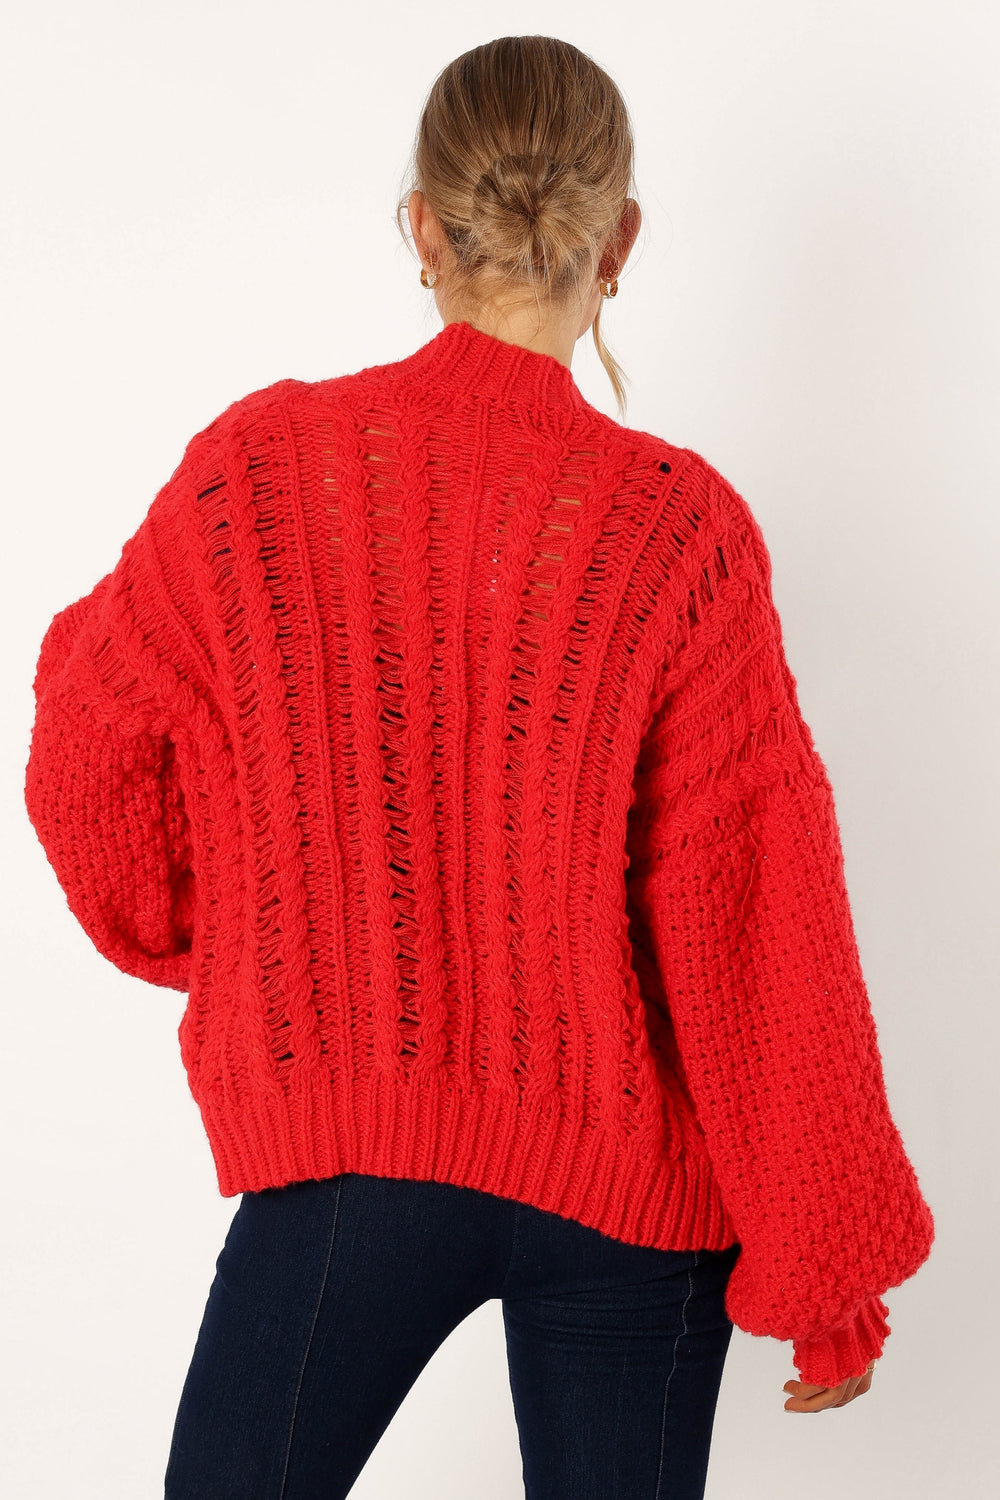 Petal and Pup USA KNITWEAR Hailey Oversized Sleeve Cardigan - Red